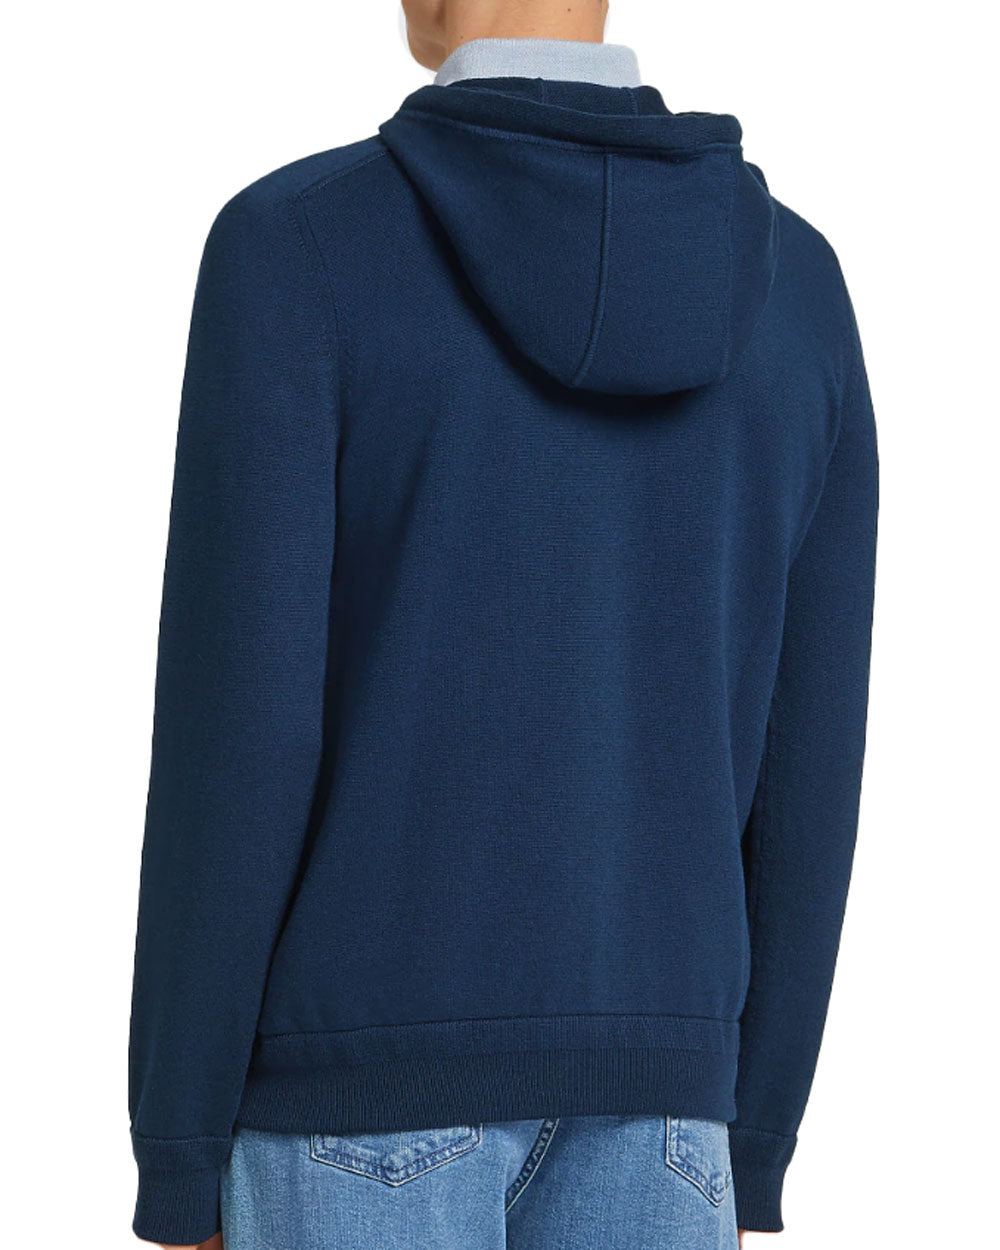 Cotton and Cashmere Hoodie in Navy